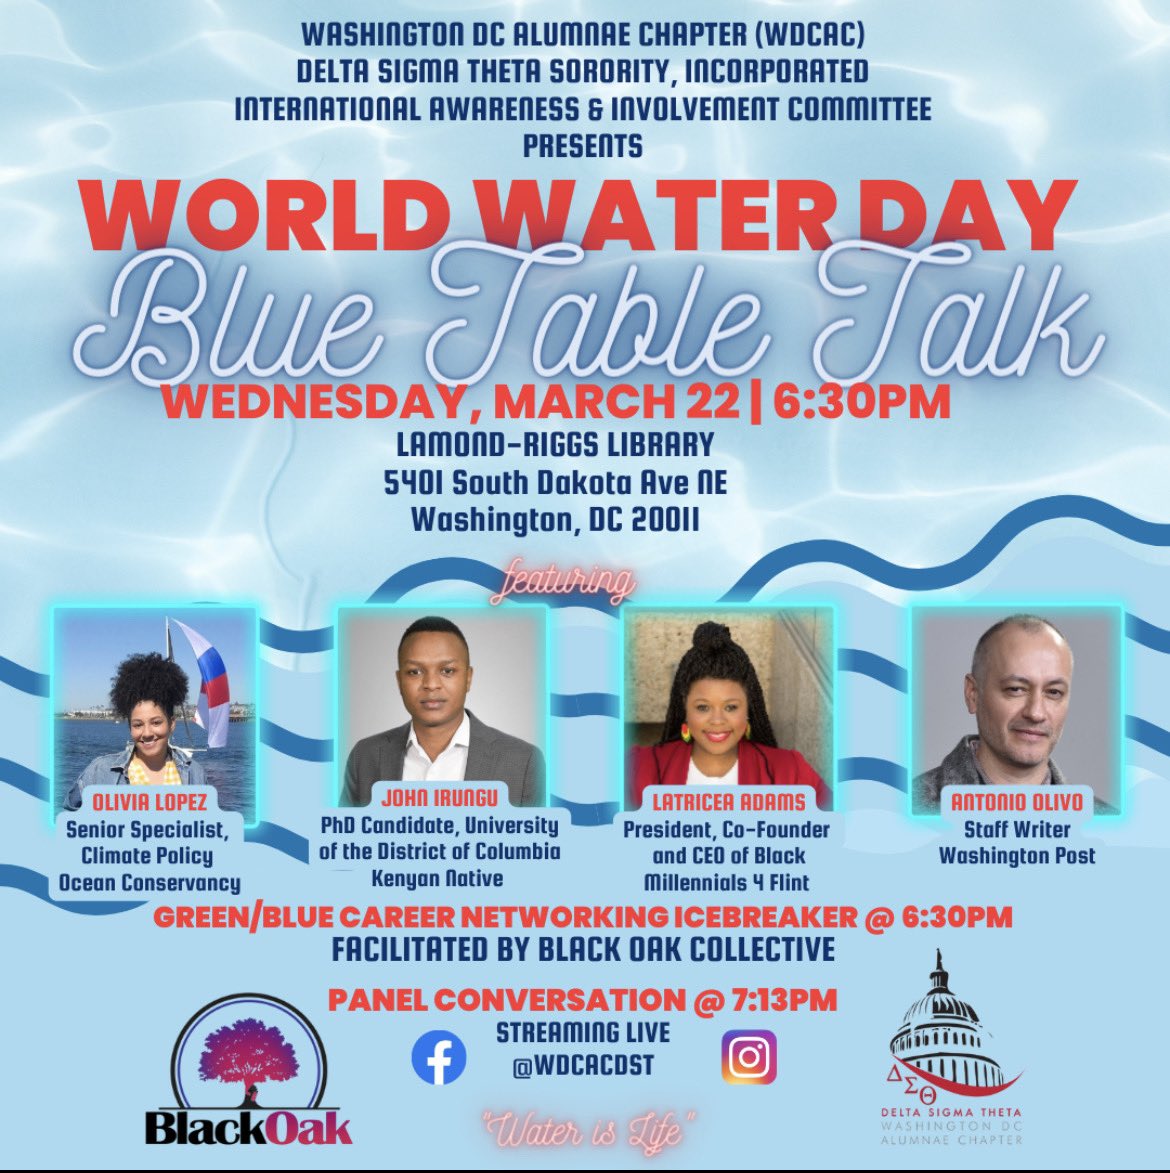 Join us WED on #WorldWaterDay for @wdcacdst’s “BLUE TABLE TALK”  featuring a career networking icebreaker and a panel conversation w/ water experts on how to be a water advocate for the district, our nation, and internationally! 🌊💧

@OurOcean @BM4Flint @dcwater #WaterisLife